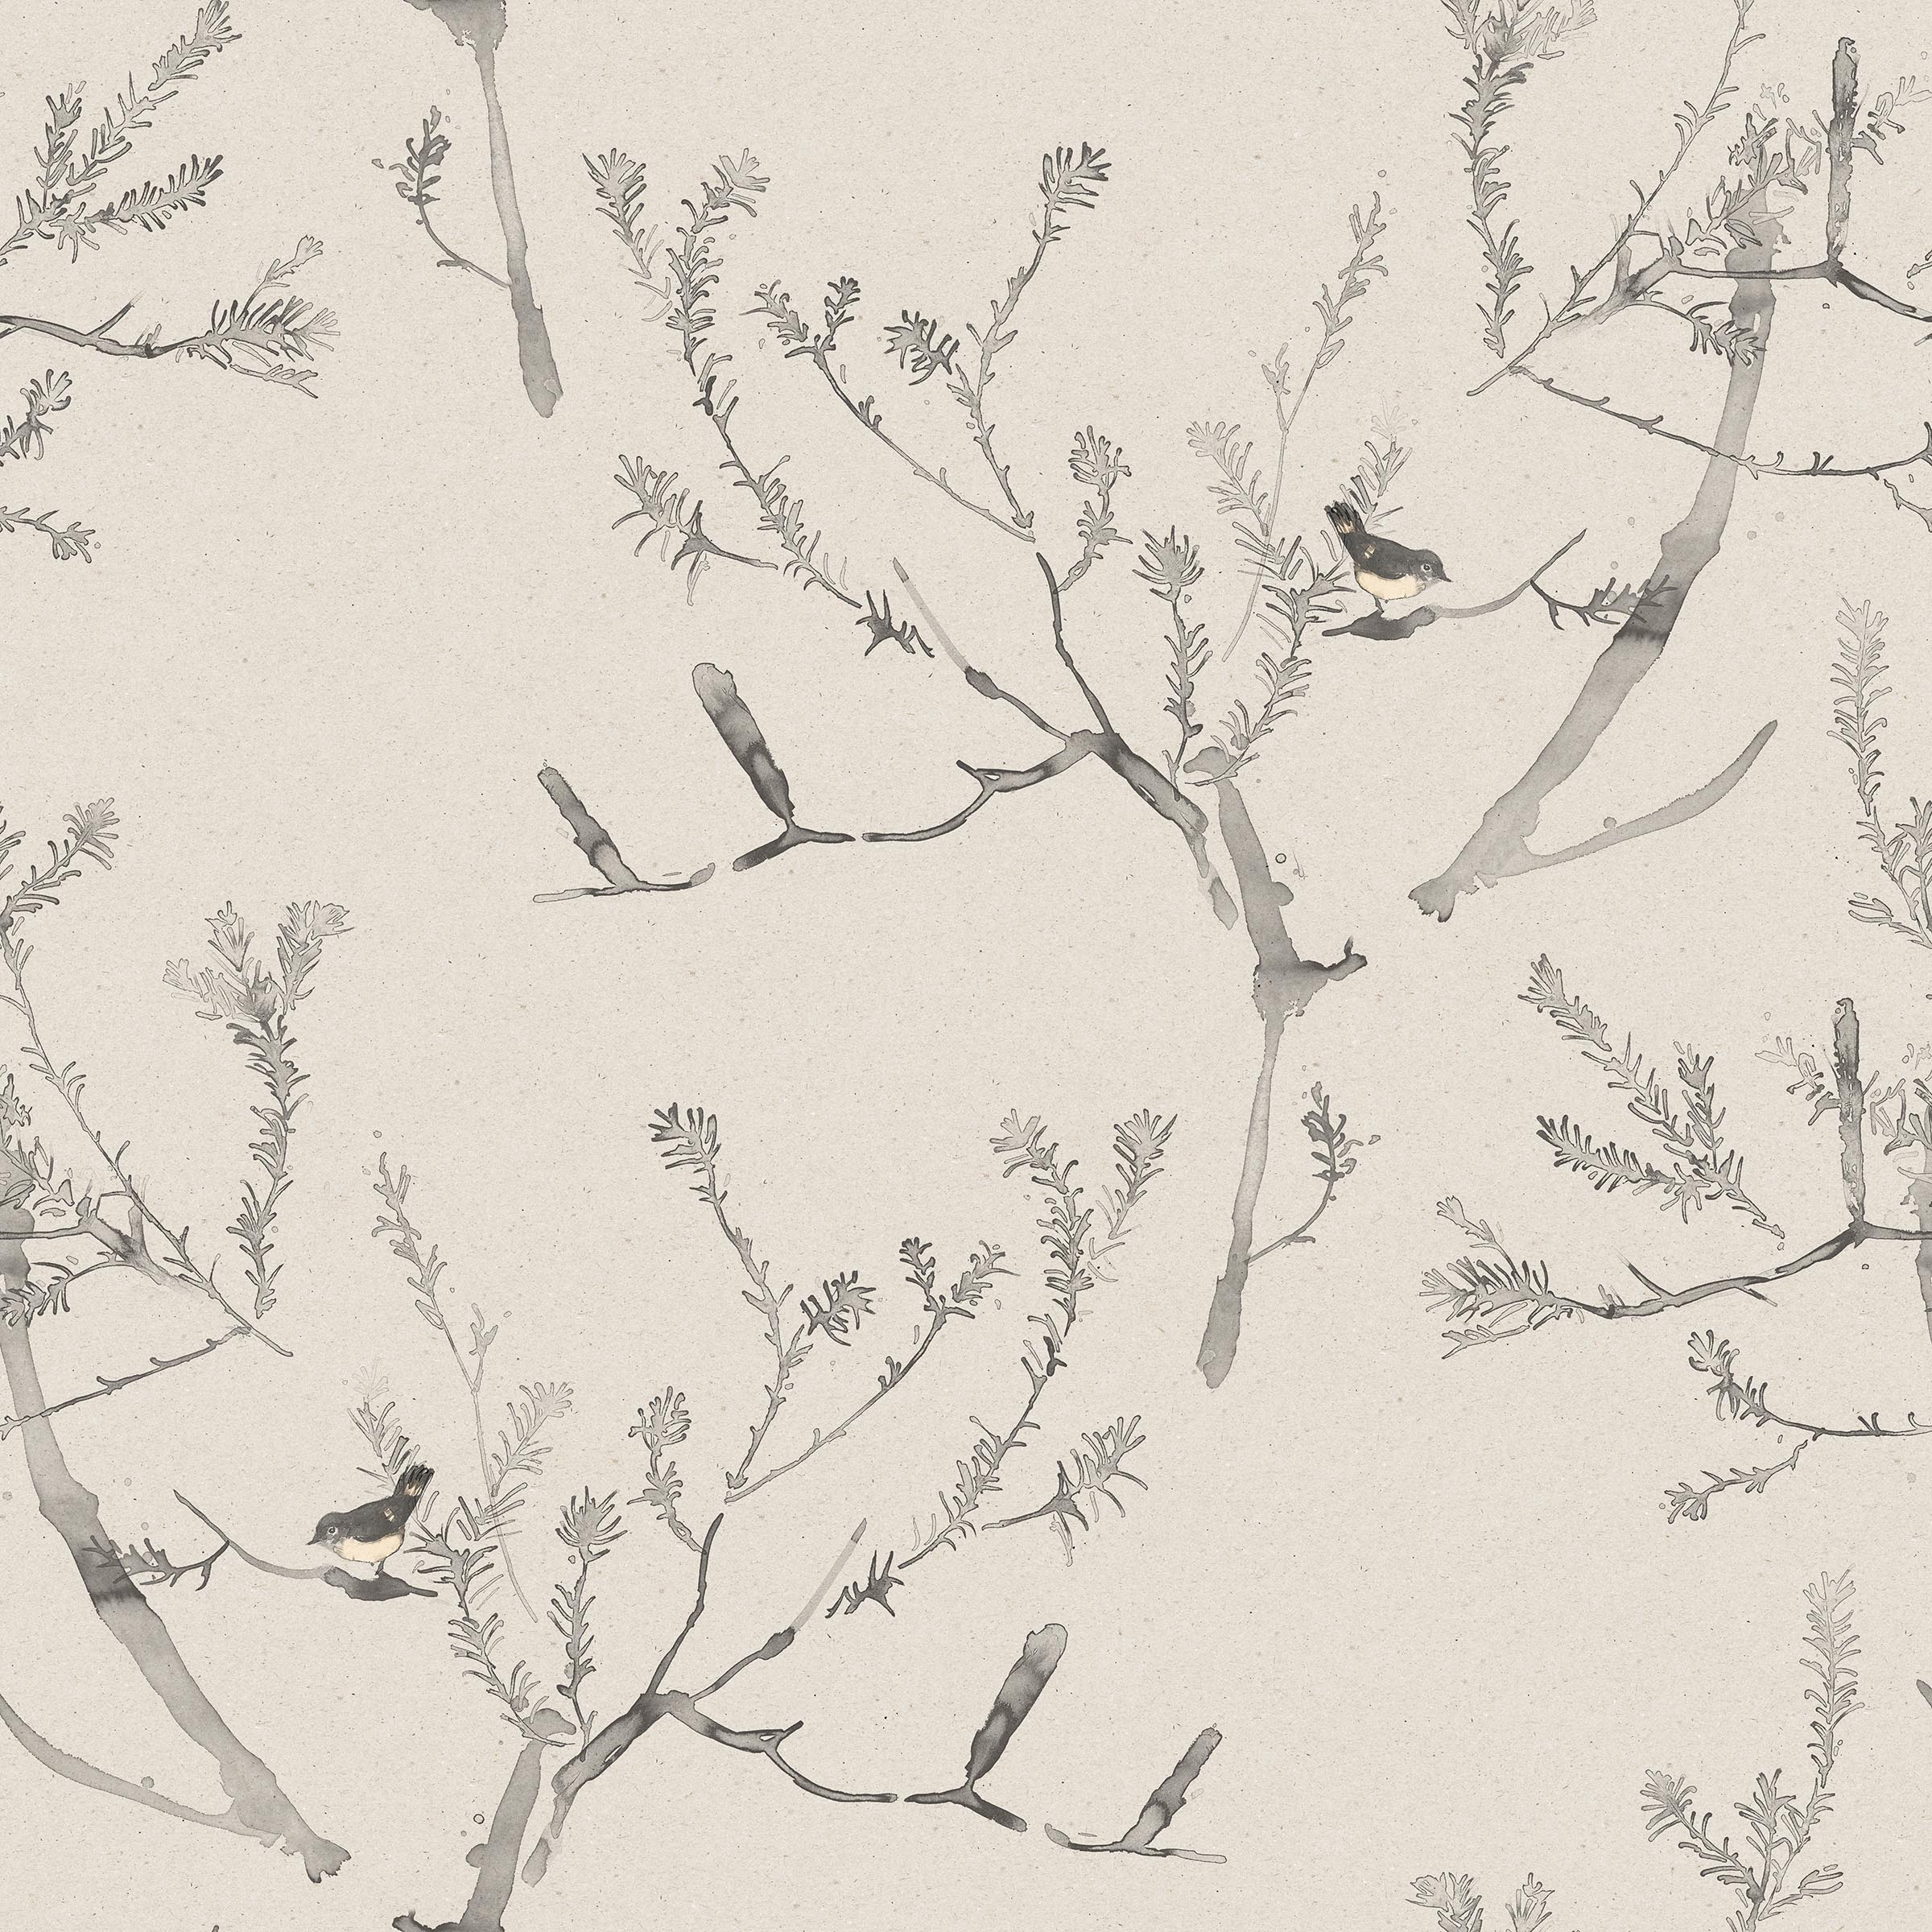 Detail of wallpaper in a painterly bird and branch pattern in shades of gray on a cream field.